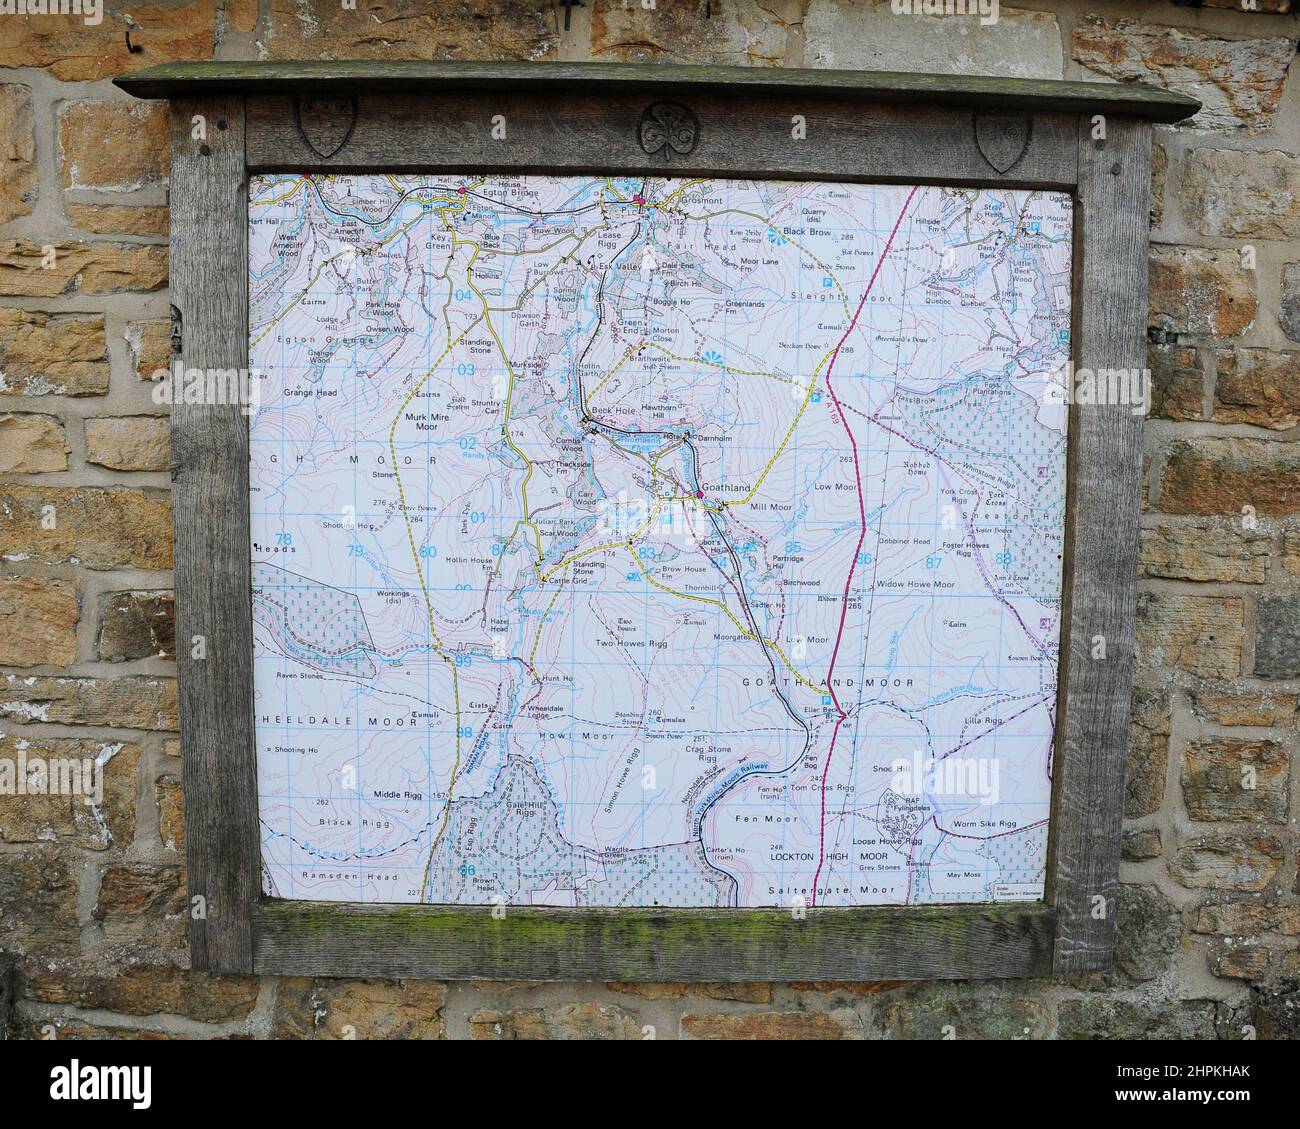 Map of the area displayed in Goathland for Public information. Stock Photo